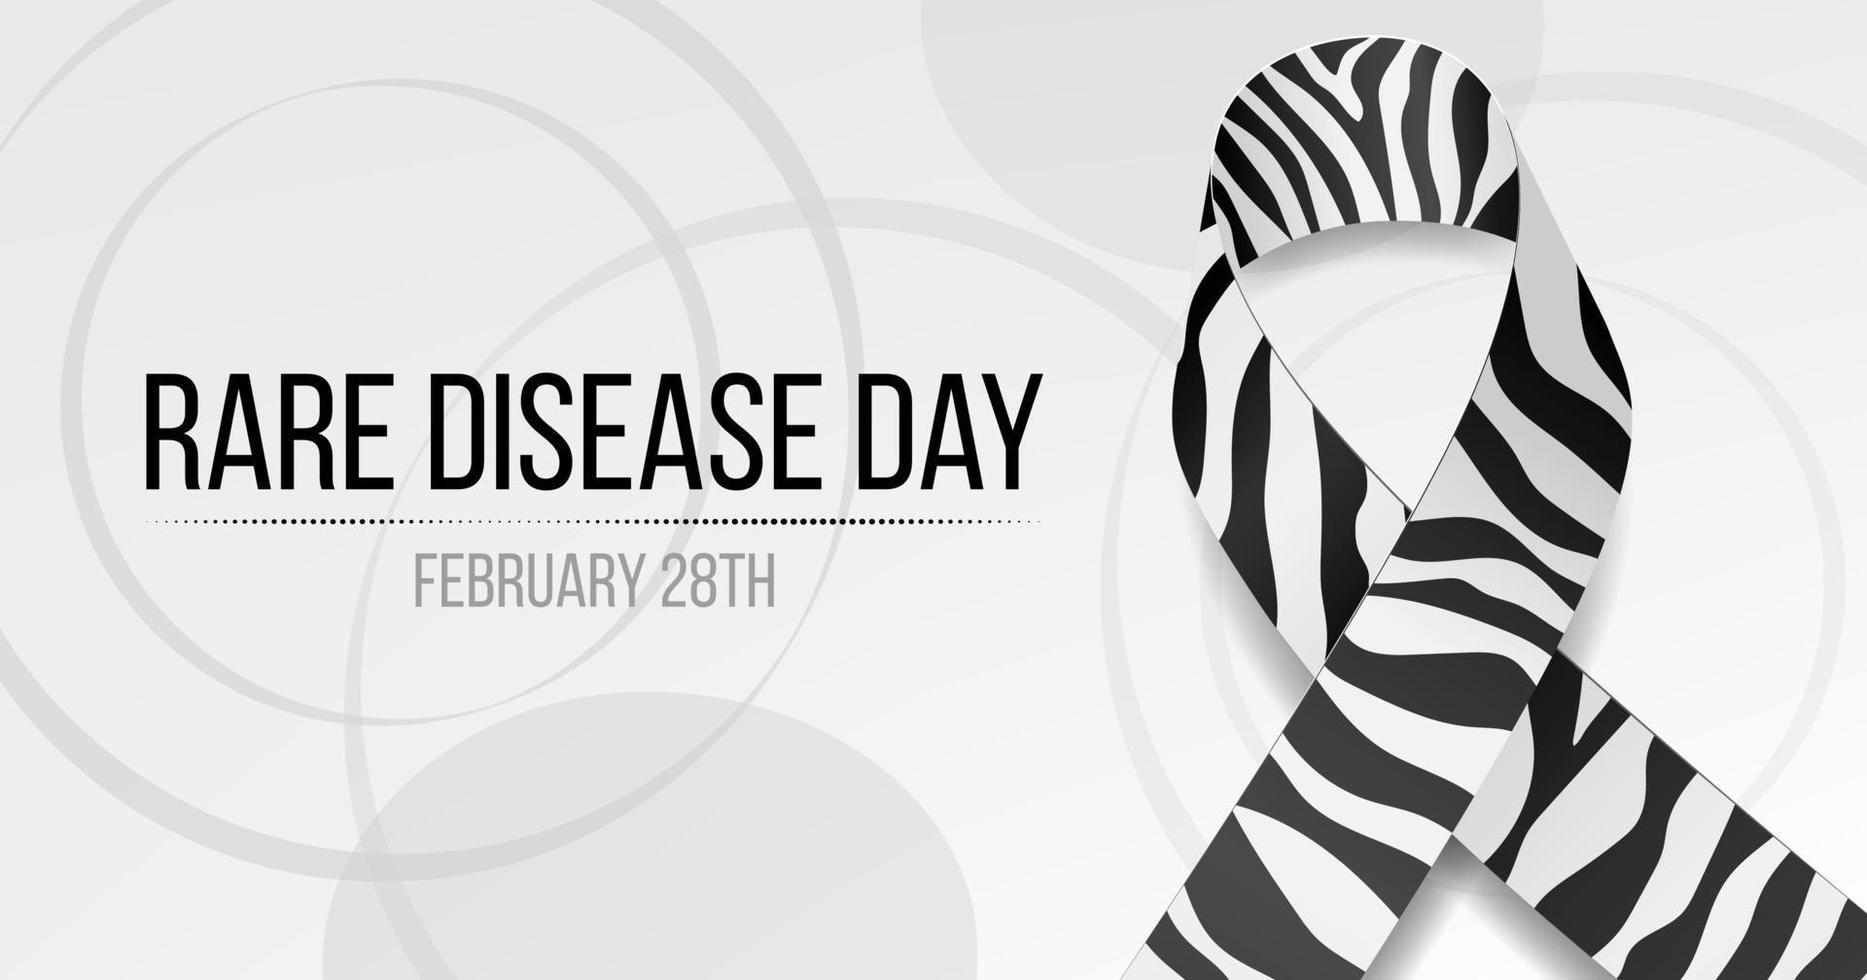 Rare disease day concept. Banner template with zebra ribbon awareness and text. Vector illustration